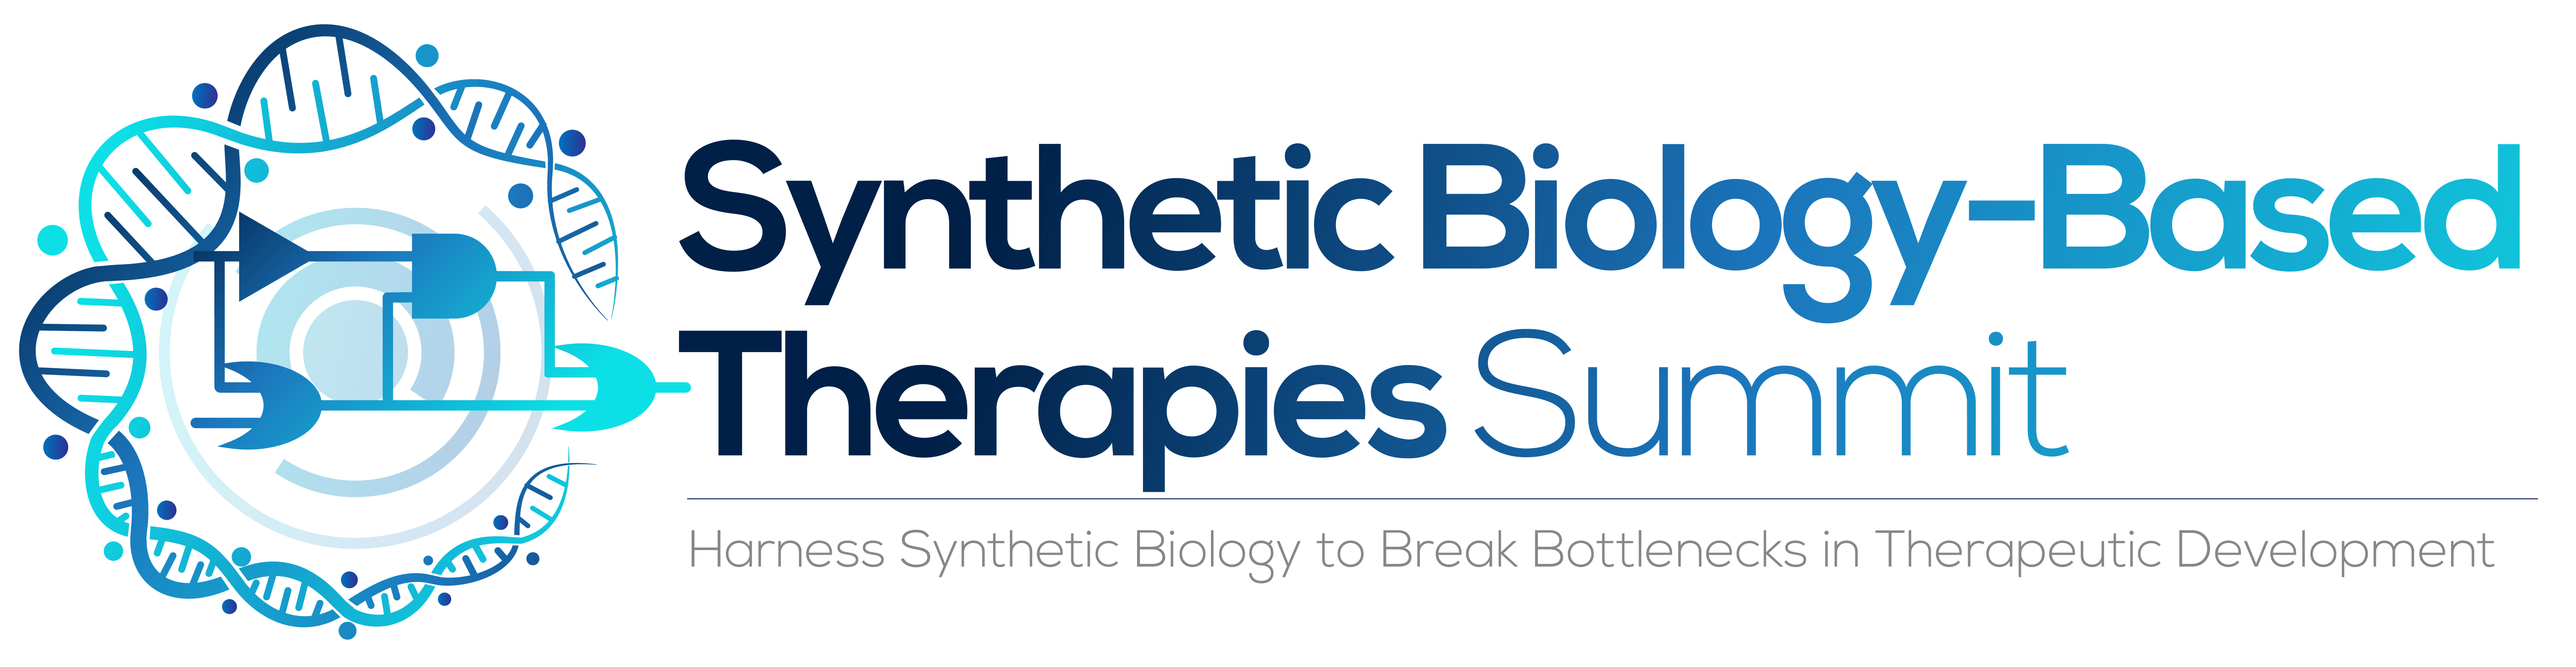 Synthetic Biology-Based Therapies Summit Logo